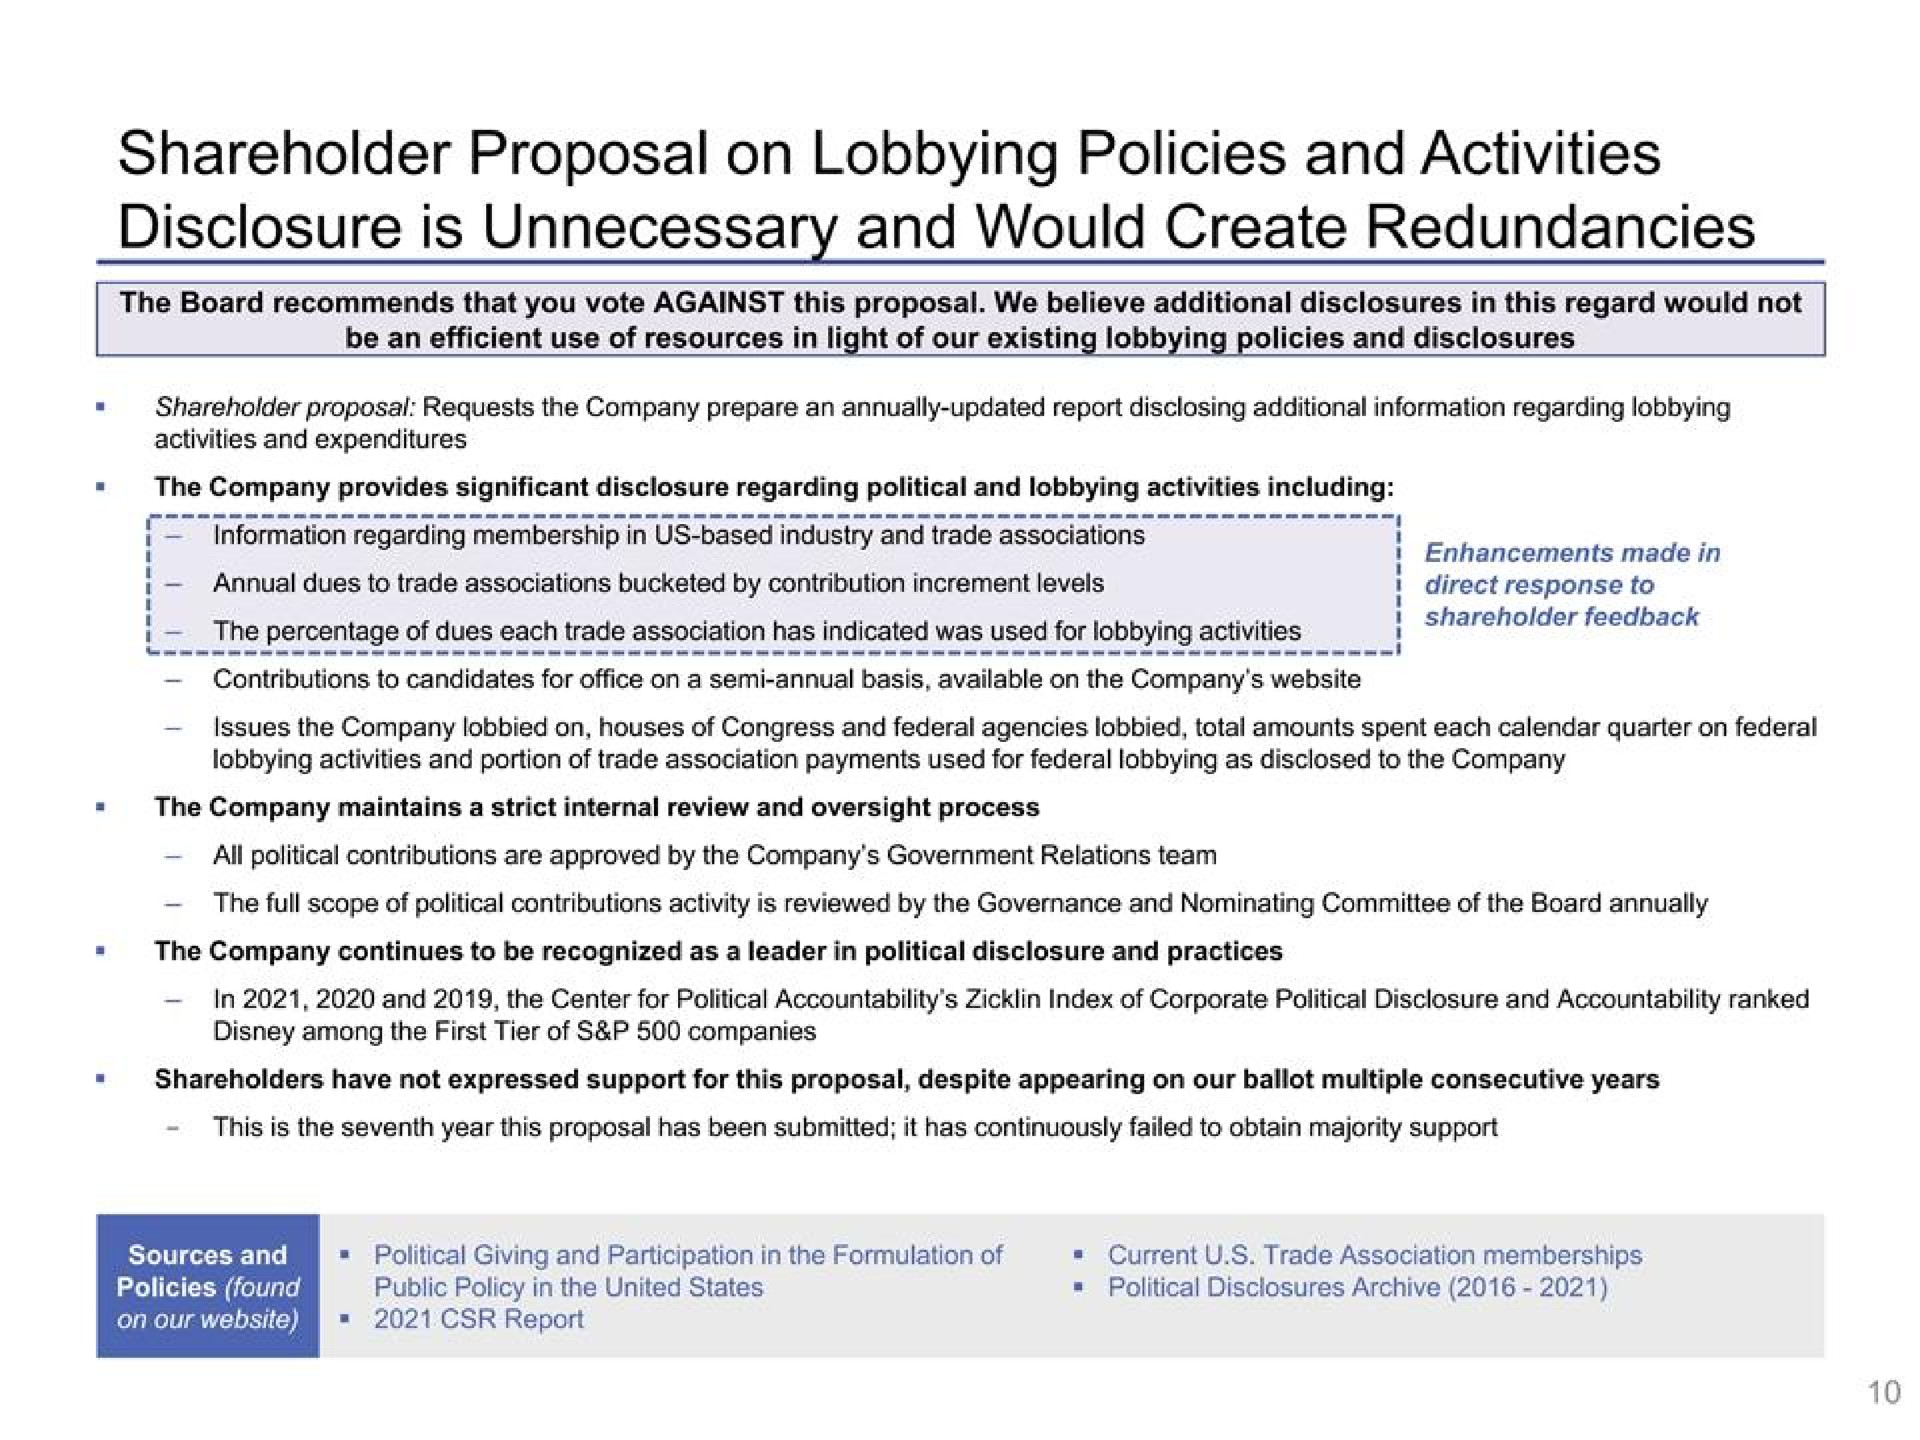 shareholder proposal on lobbying policies and activities disclosure is unnecessary and would create redundancies | Disney